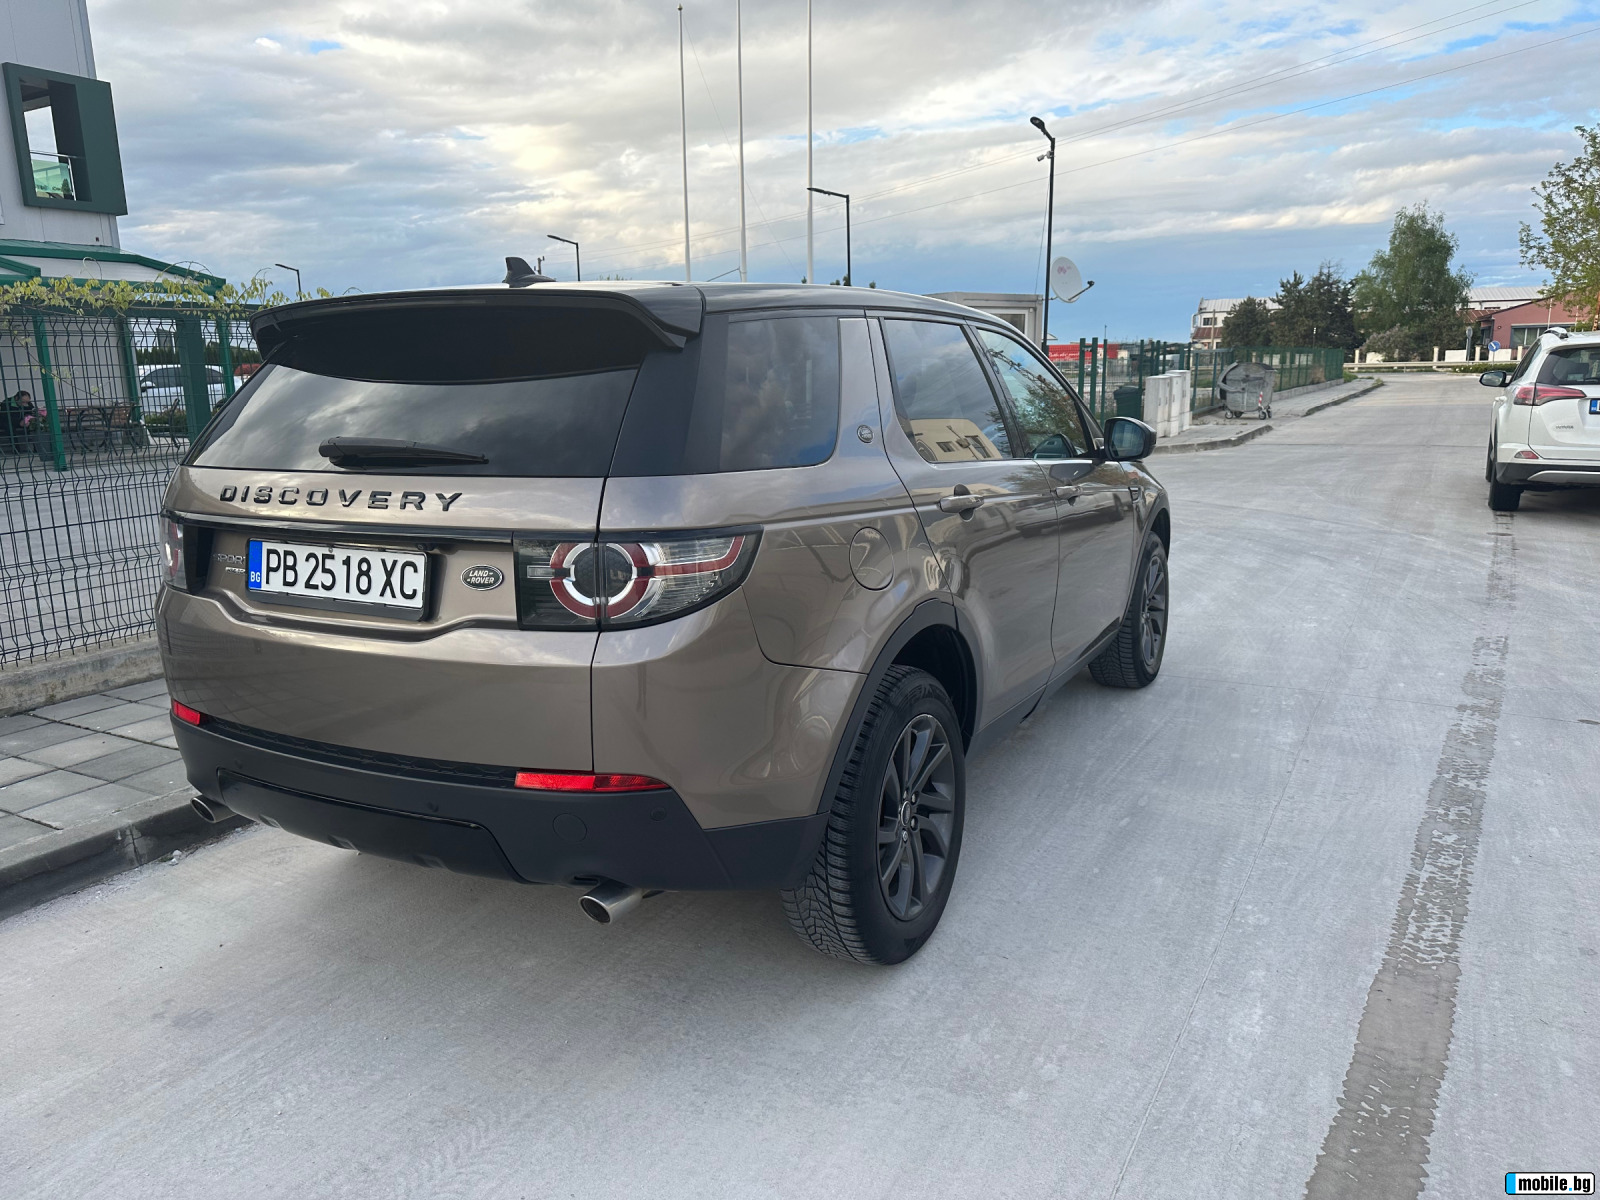 Land Rover Discovery SPORT 2.2d | Mobile.bg   15